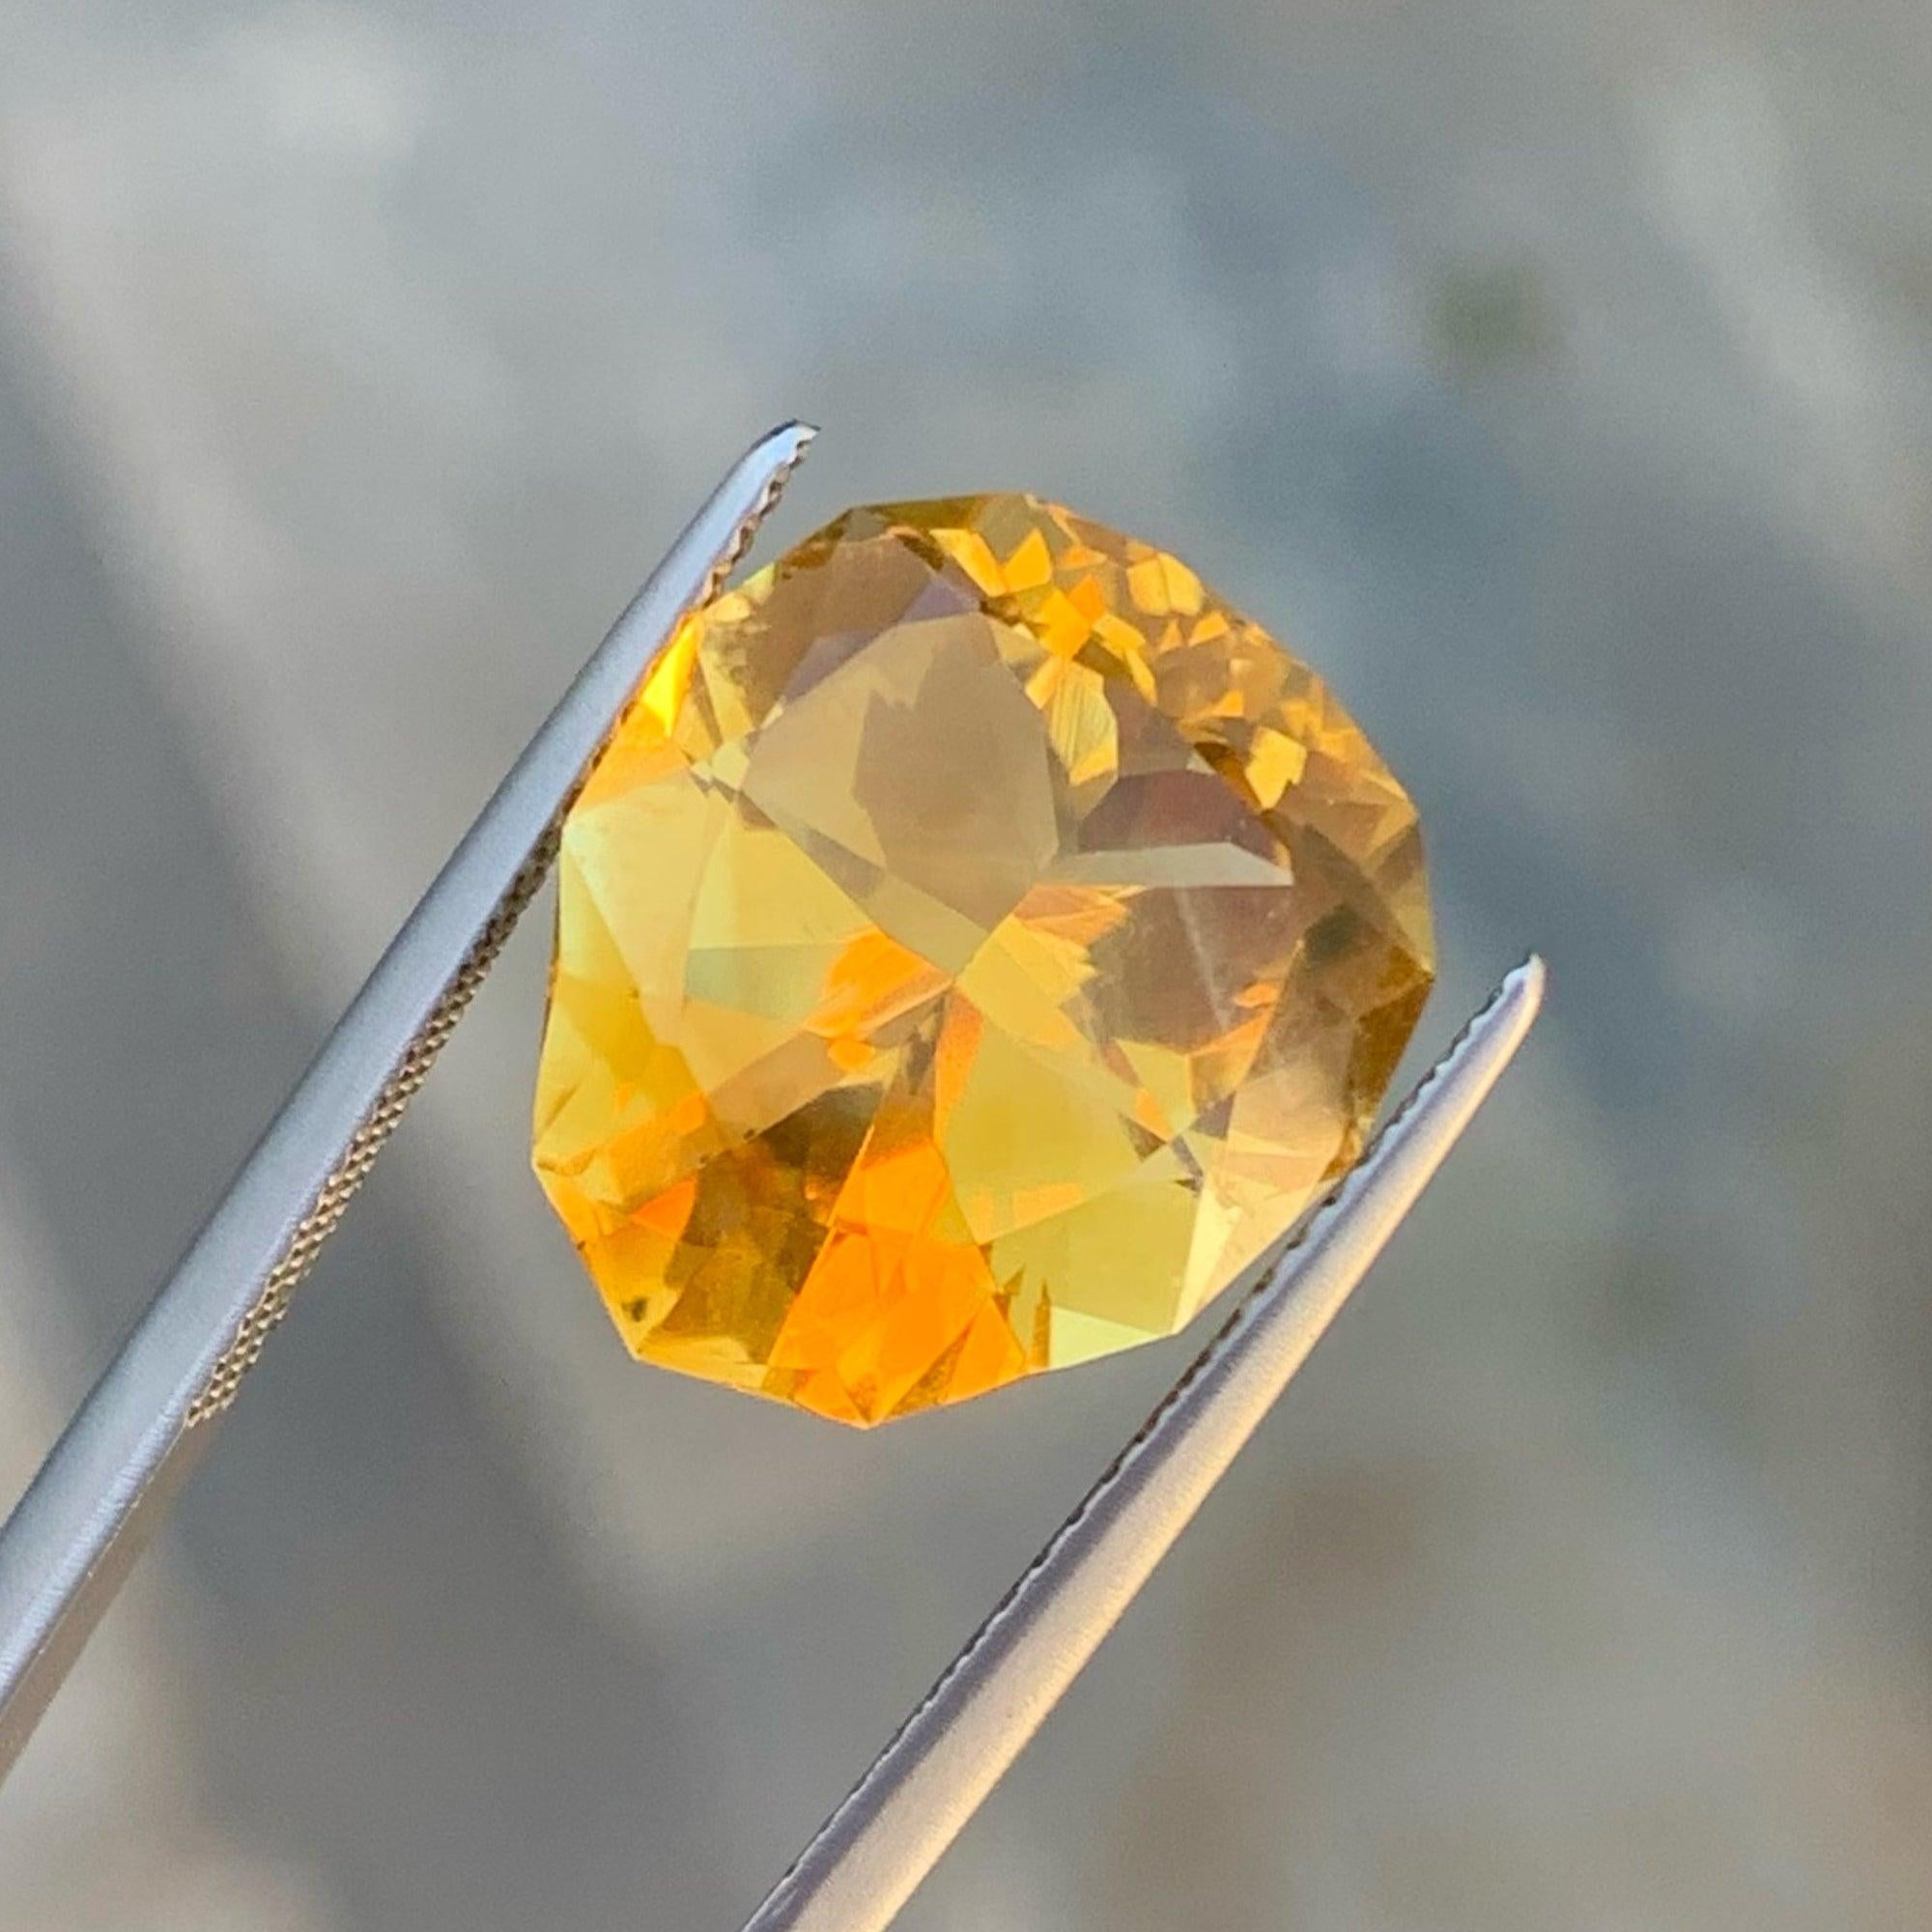 Brilliant Natural Orange Yellow Citrine, Available for sale at whole sale price natural high quality 8.05 Carats Loupe Clean Clarity Loose Citrine From Brazil.

Product Information:
GEMSTONE TYPE: Brilliant Natural Orange Yellow Citrine
WEIGHT: 8.05